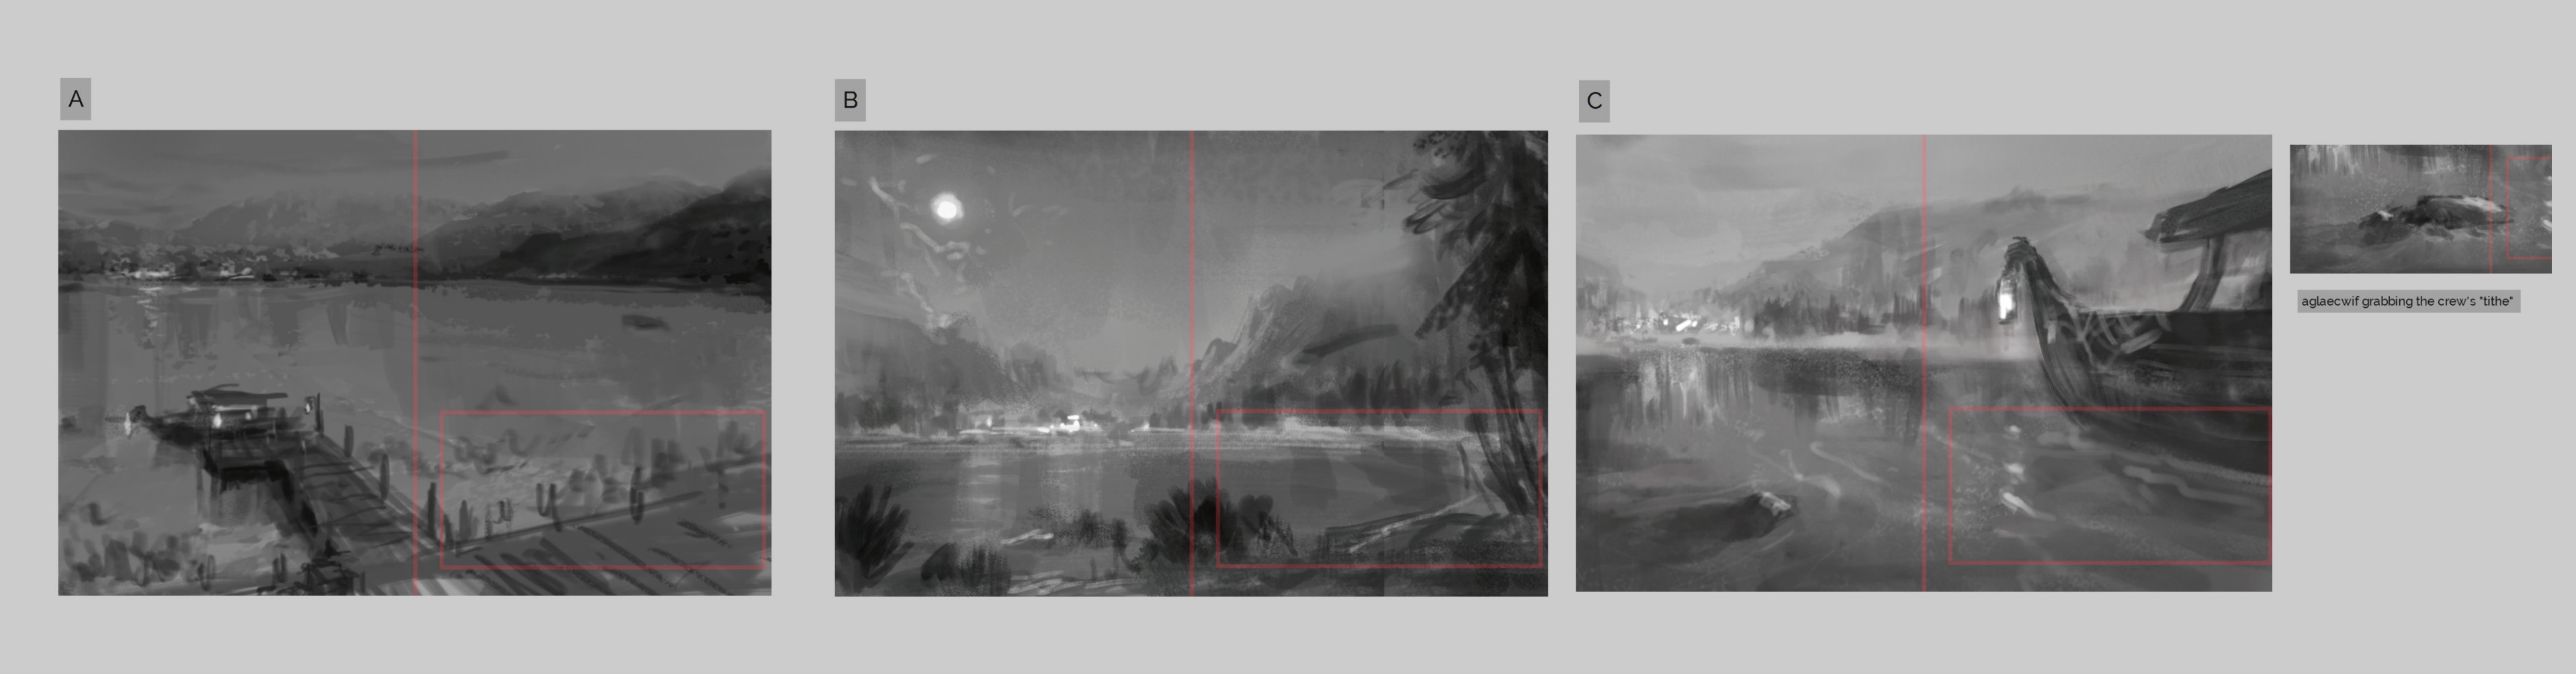 Thumbnails based on different scenarios navigating the lake the players can take.